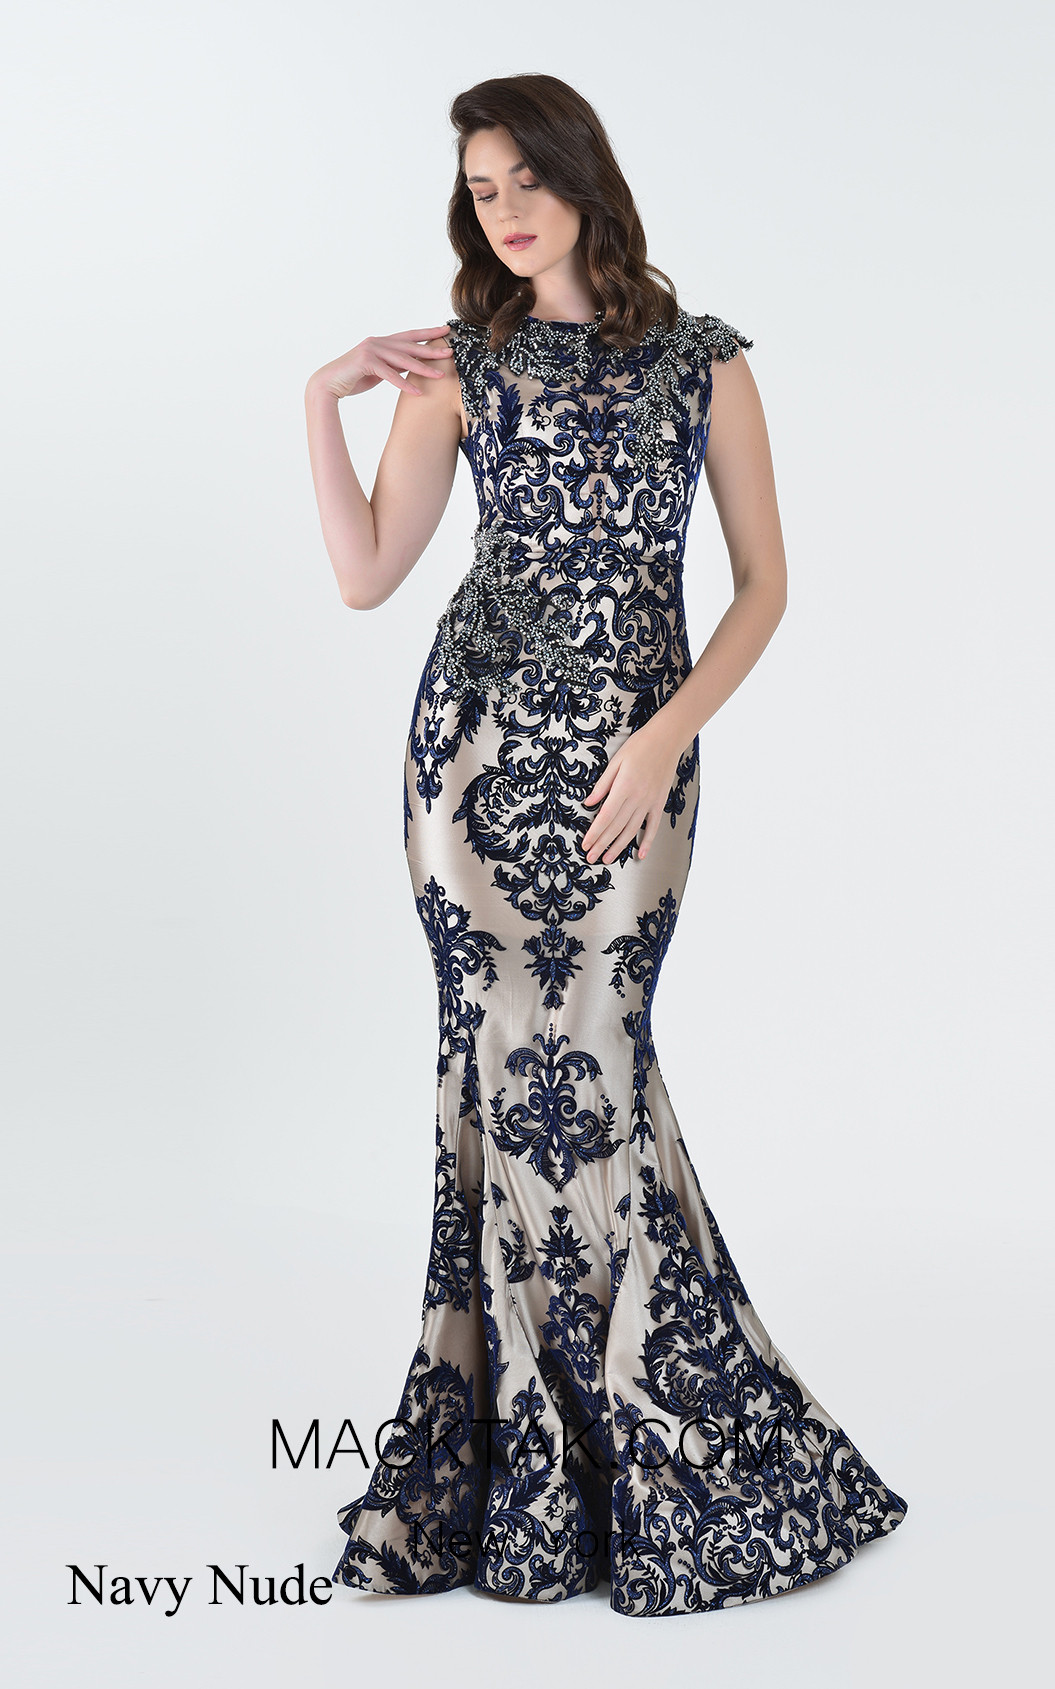 MackTak Couture 5134 Navy Nude Front Dress